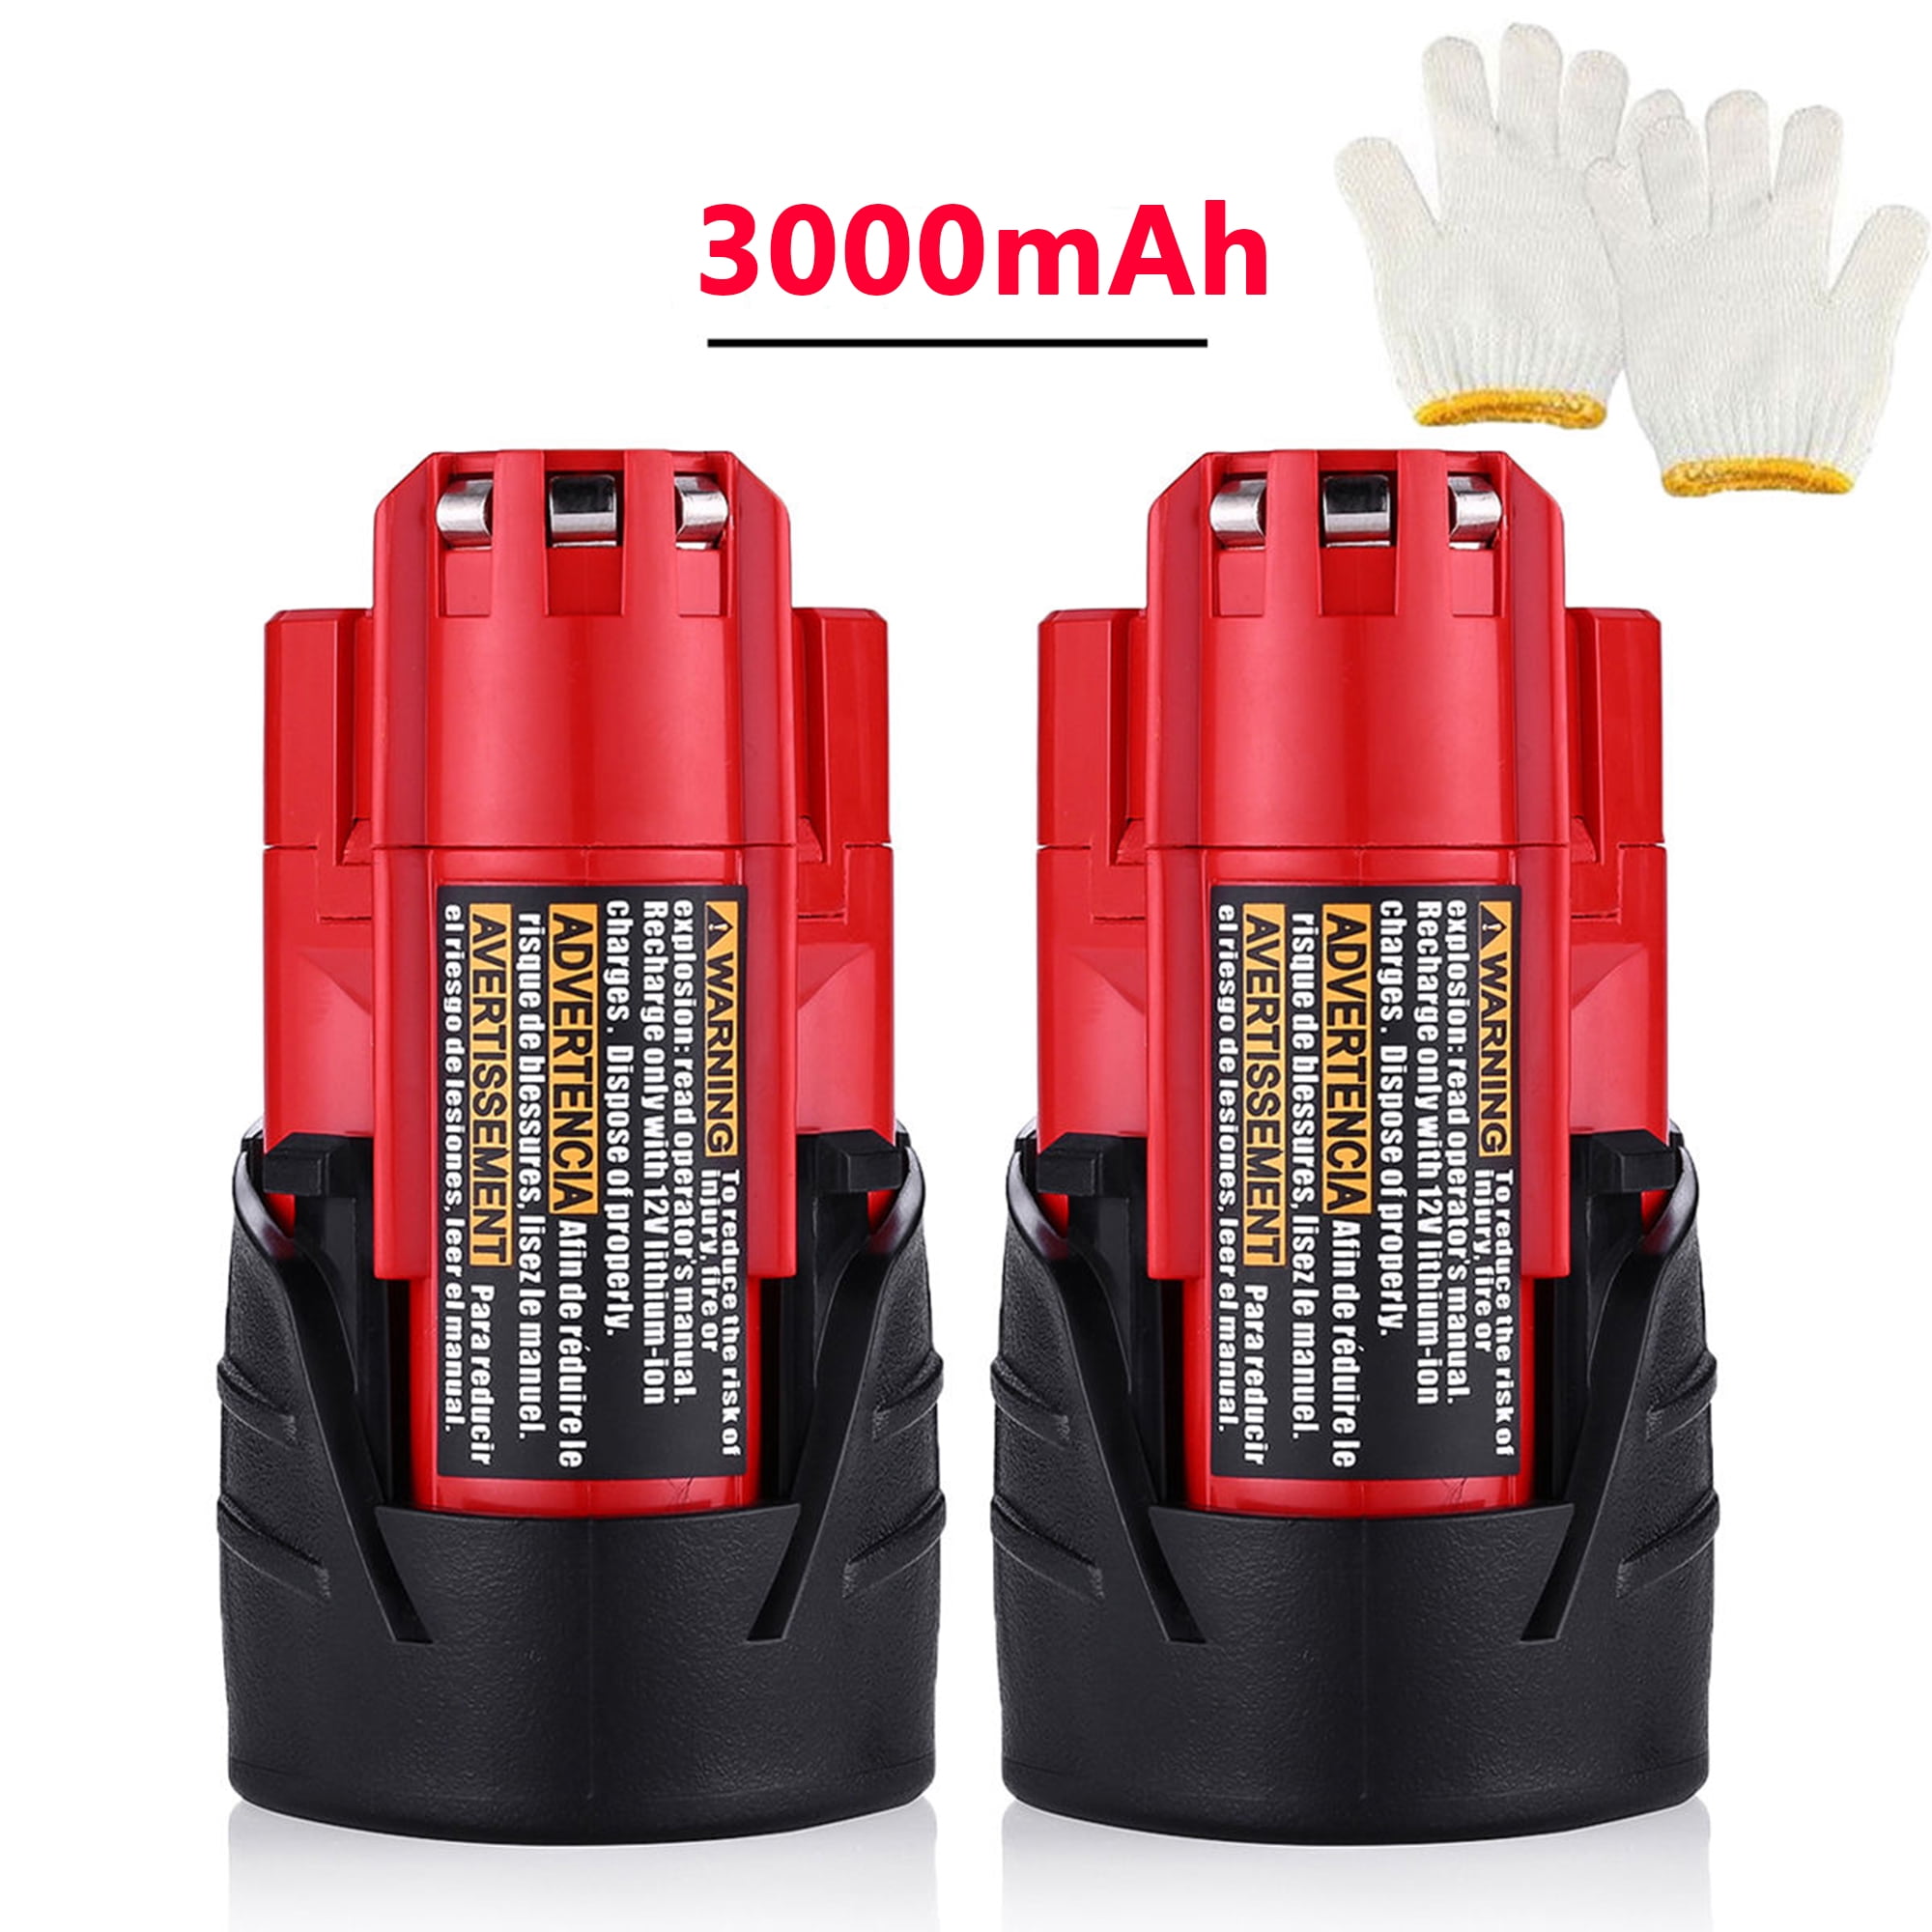 2-Pack 12V 3000mAh Replacement Battery for Milwaukee M12 48-11-2411